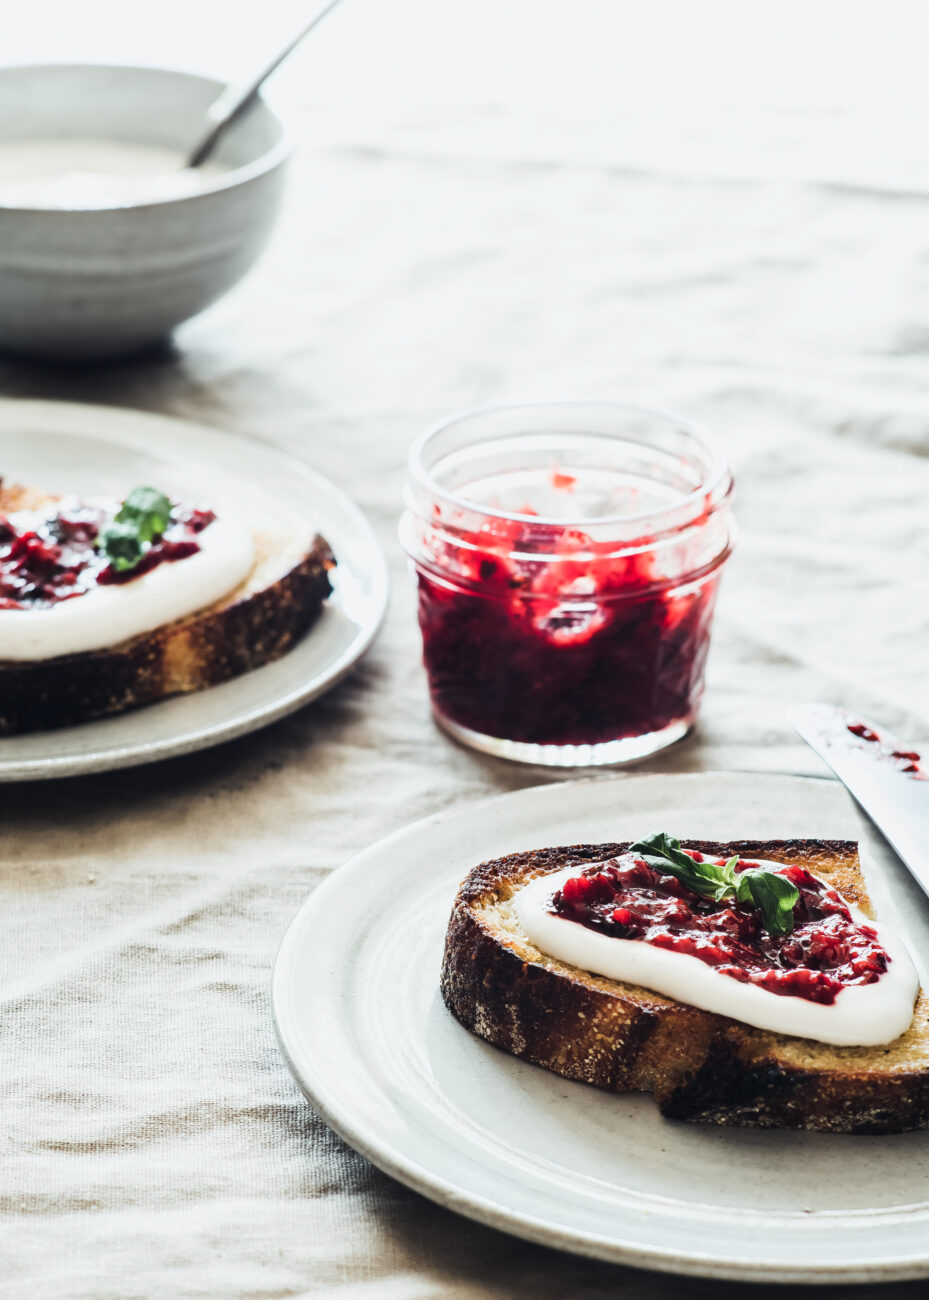 Homemade Strawberry and Basil Jam Recipe: A Sweet and Savory Spread